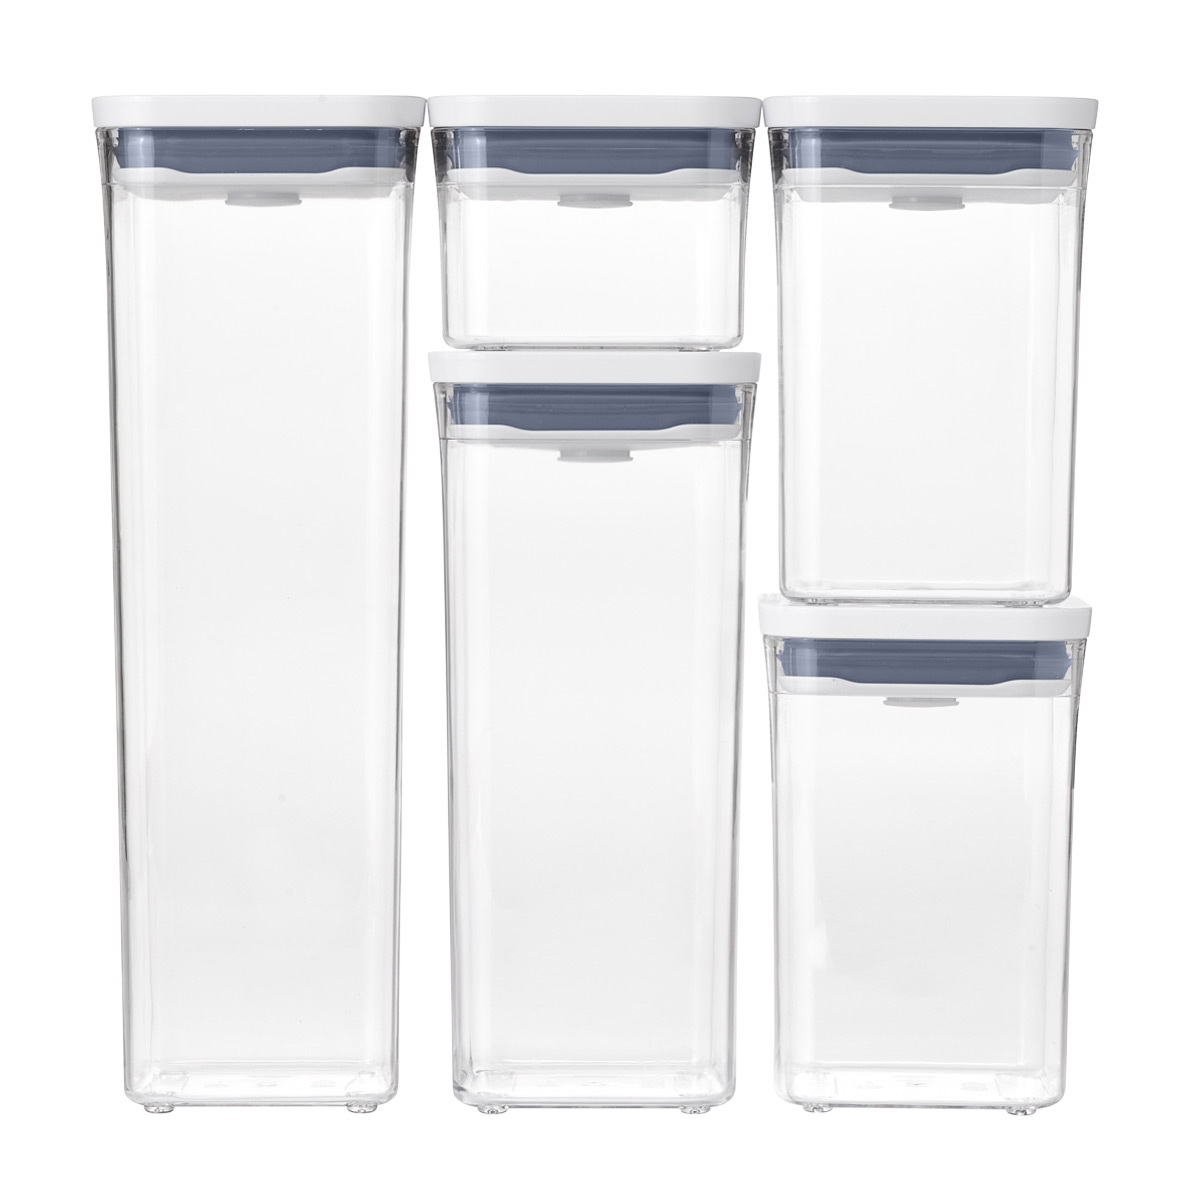 OXO Good Grips 5 POP Container Set